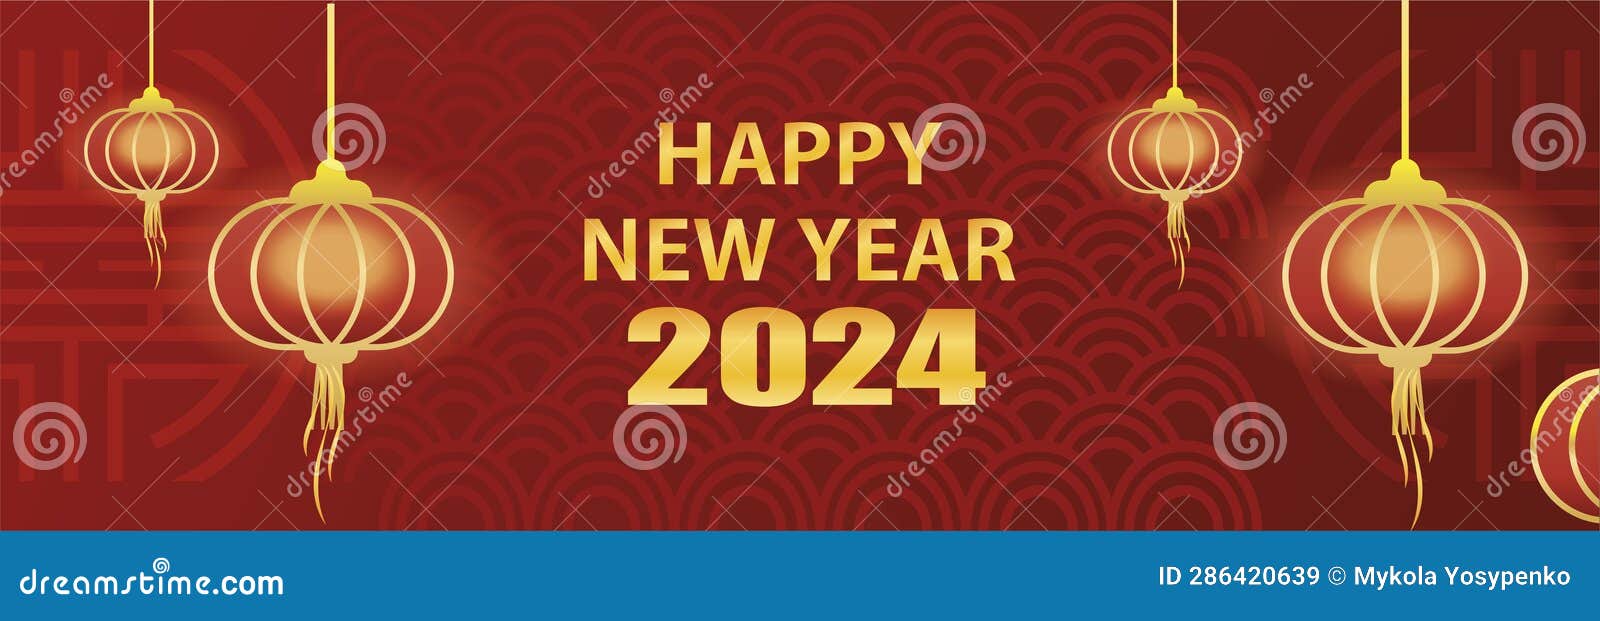 Happy 2024 New Year Banner with Lanterns Stock Vector Illustration of